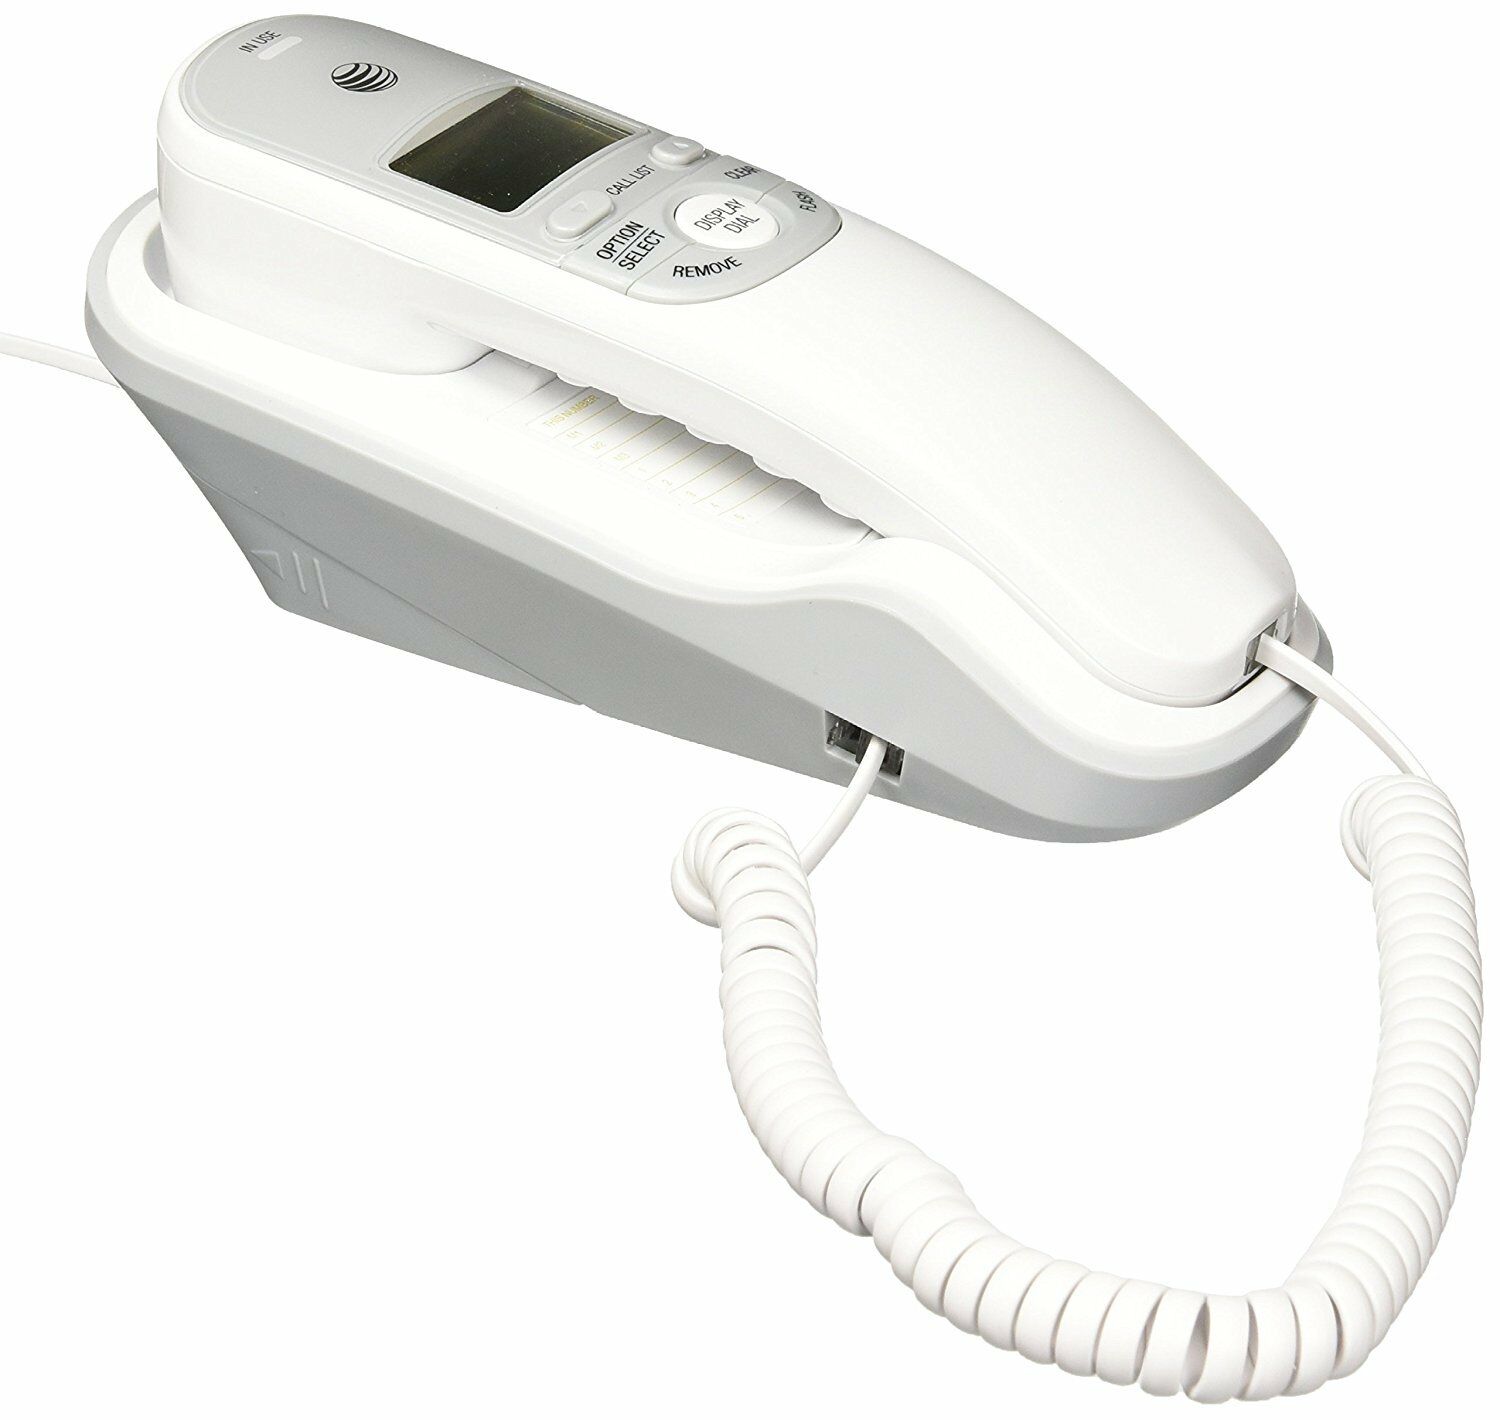 Att Corded Home Phone Office With Caller Id Desk And Wall Mount Telephone